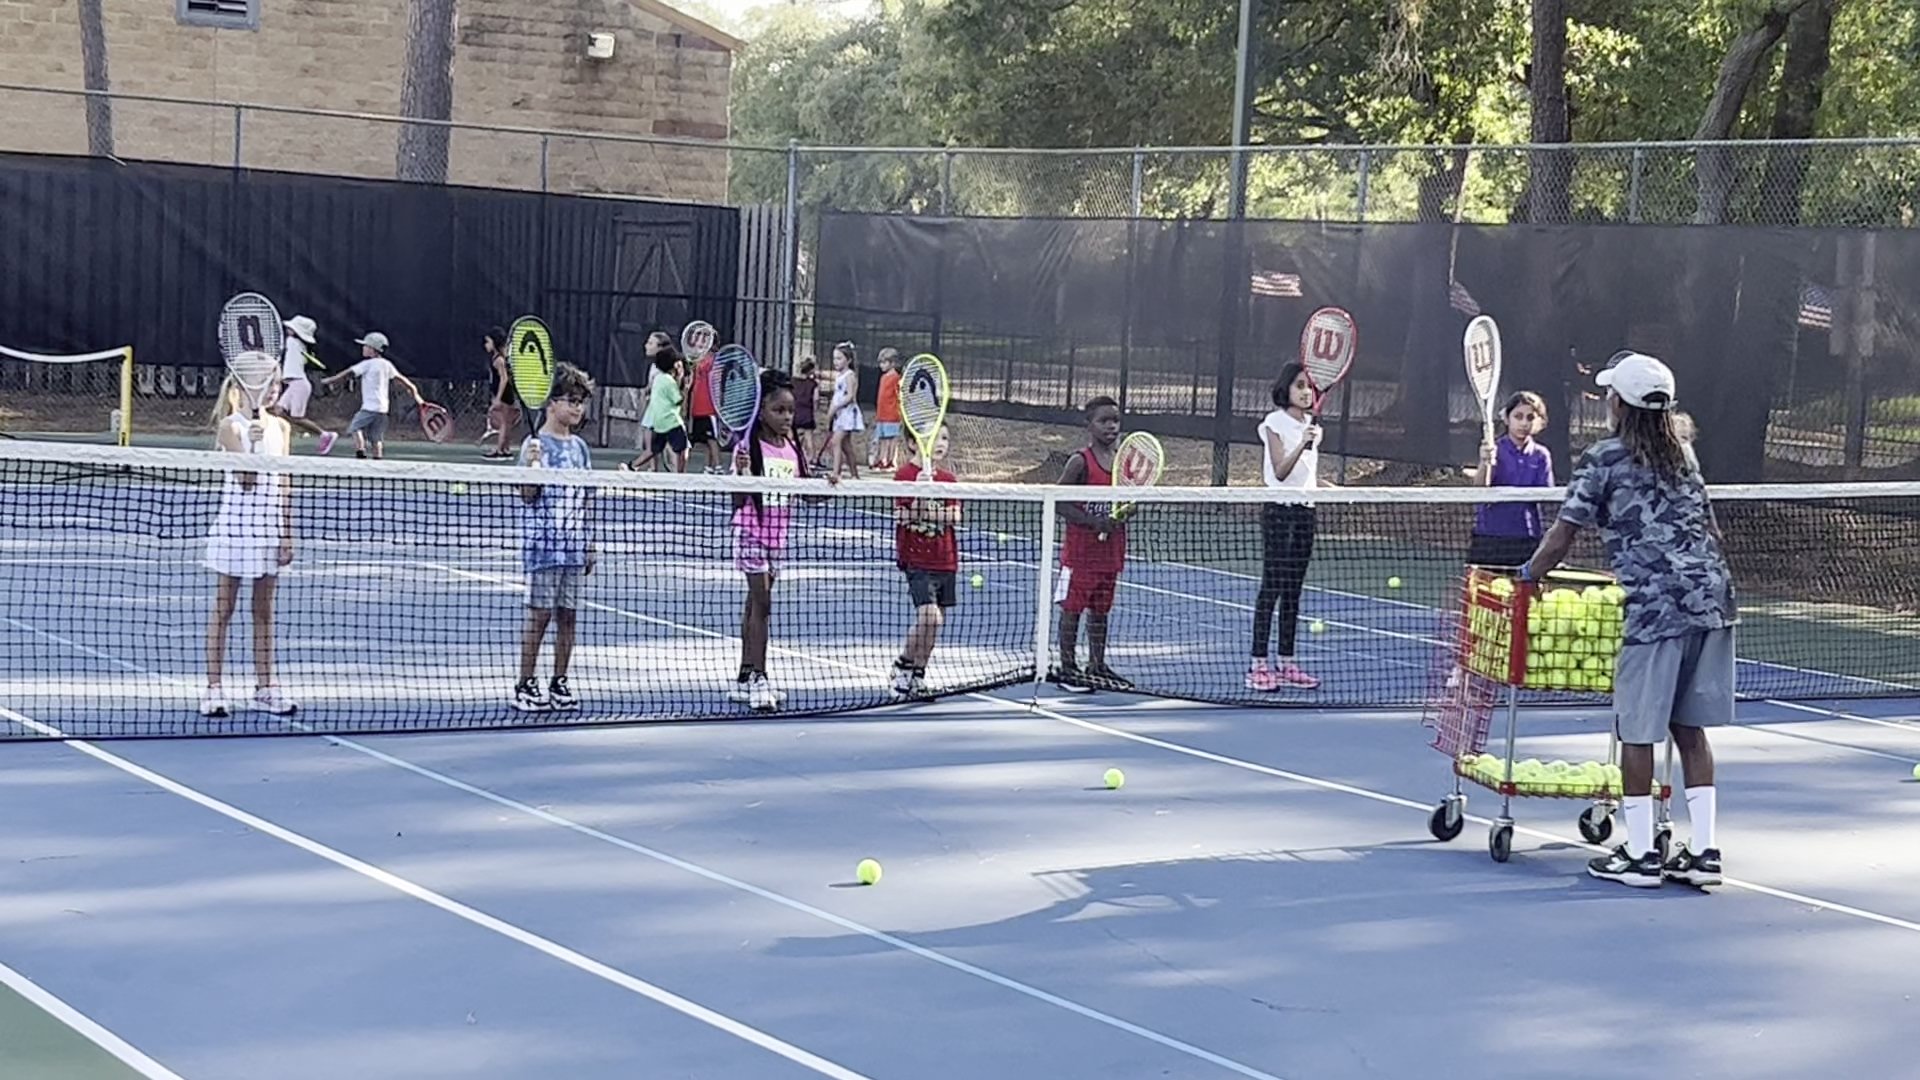 Spring Woodlands tennis lessons for junior and adults